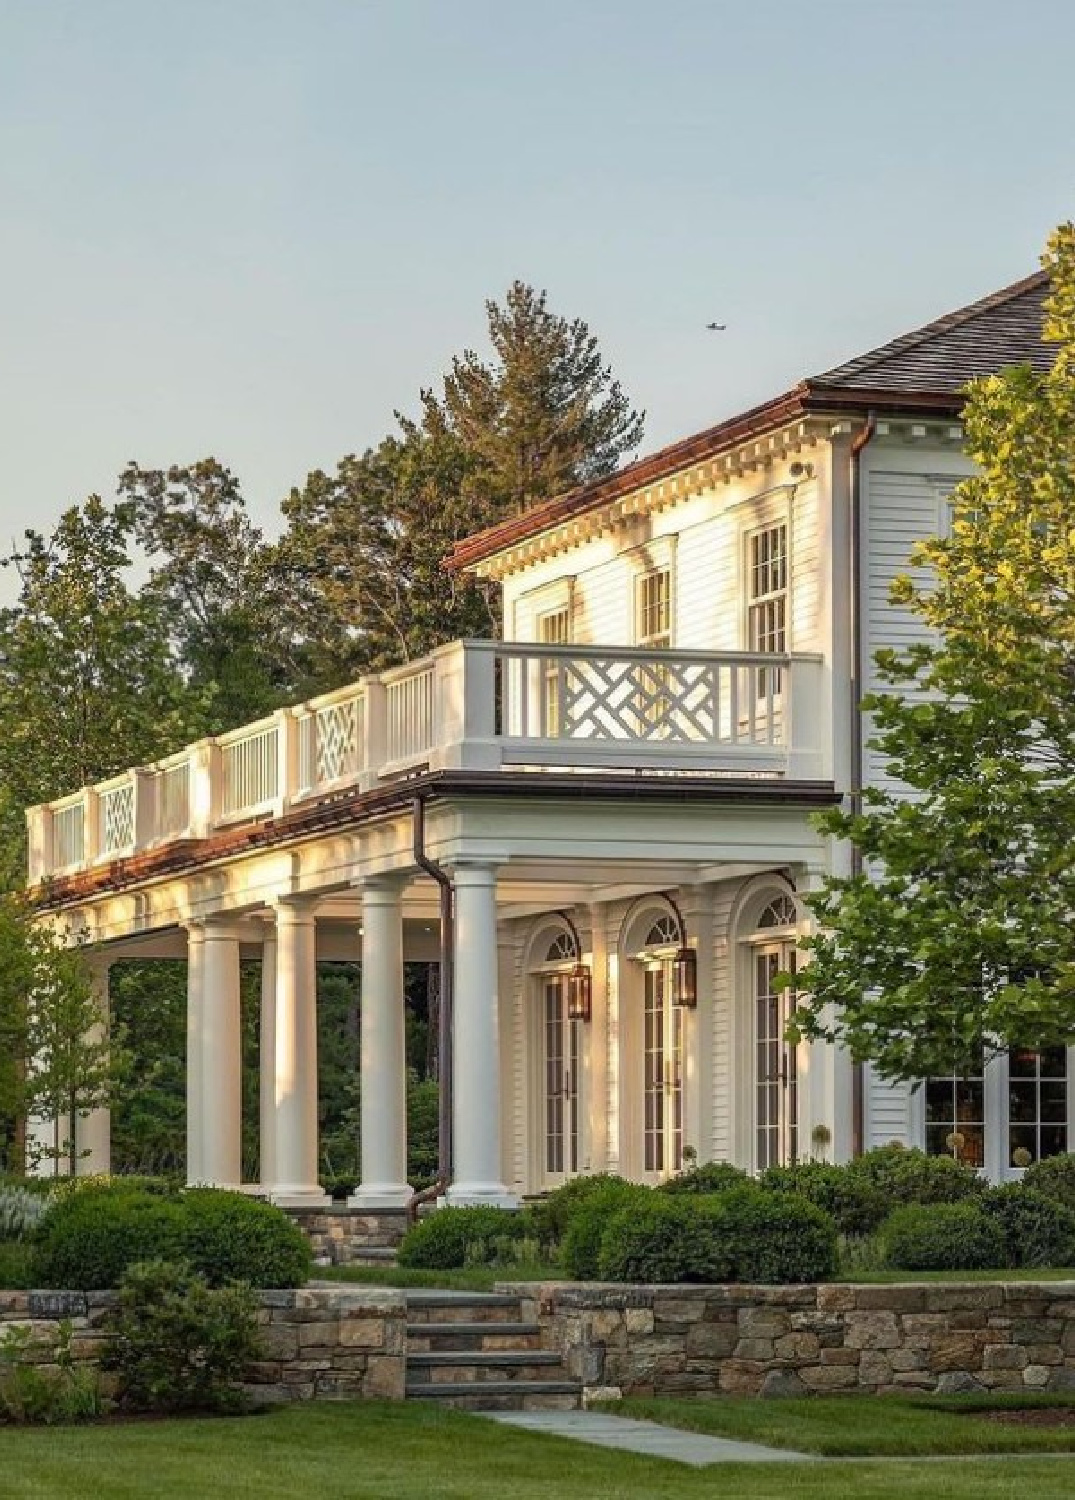 @rbaarchitectureinc - Magnificent architecture on this classic white house exterior with stately columns. #classicarchitecture #whitehouses #whitehouseexteriors